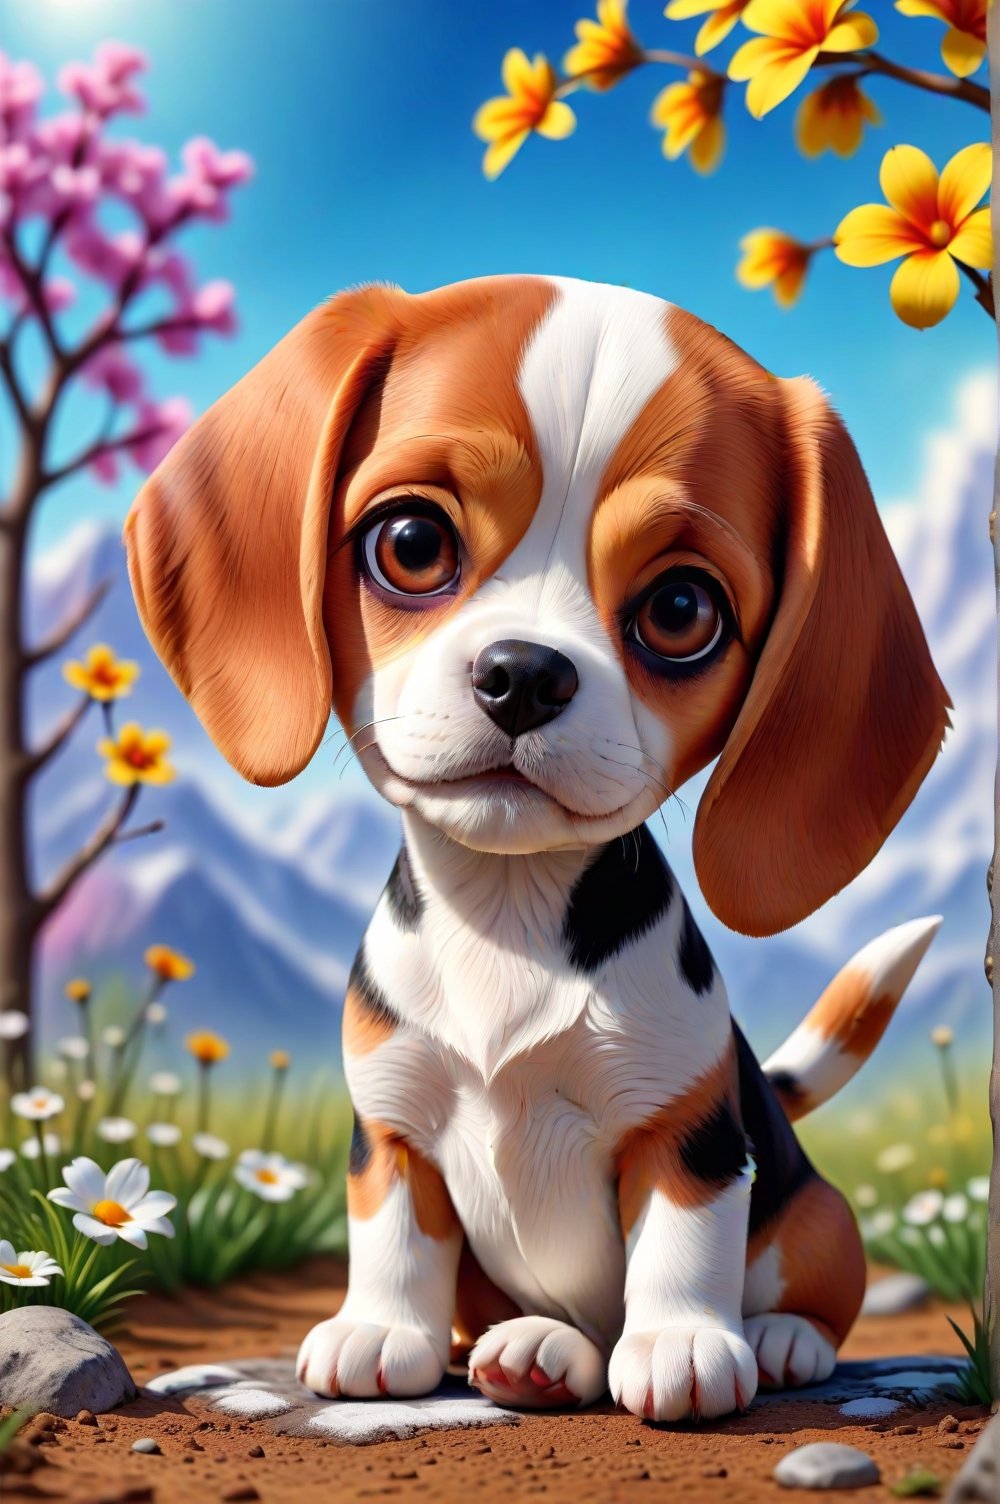 There is a little dog (Beagle race) sitting in a funny pose,  beautiful digital painting,  cute digital art,  cute little dog,  cute detailed digital art,  adorable and cute,  very cute little dog,  a cute little dog,  beautiful 3D rendering,  cute little dog,  cute and adorable,  visual image of a cute and adorable puppy. Spring weather in the background.,,chibi,,,,<lora:659095807385103906:1.0>,<lora:659095807385103906:1.0>